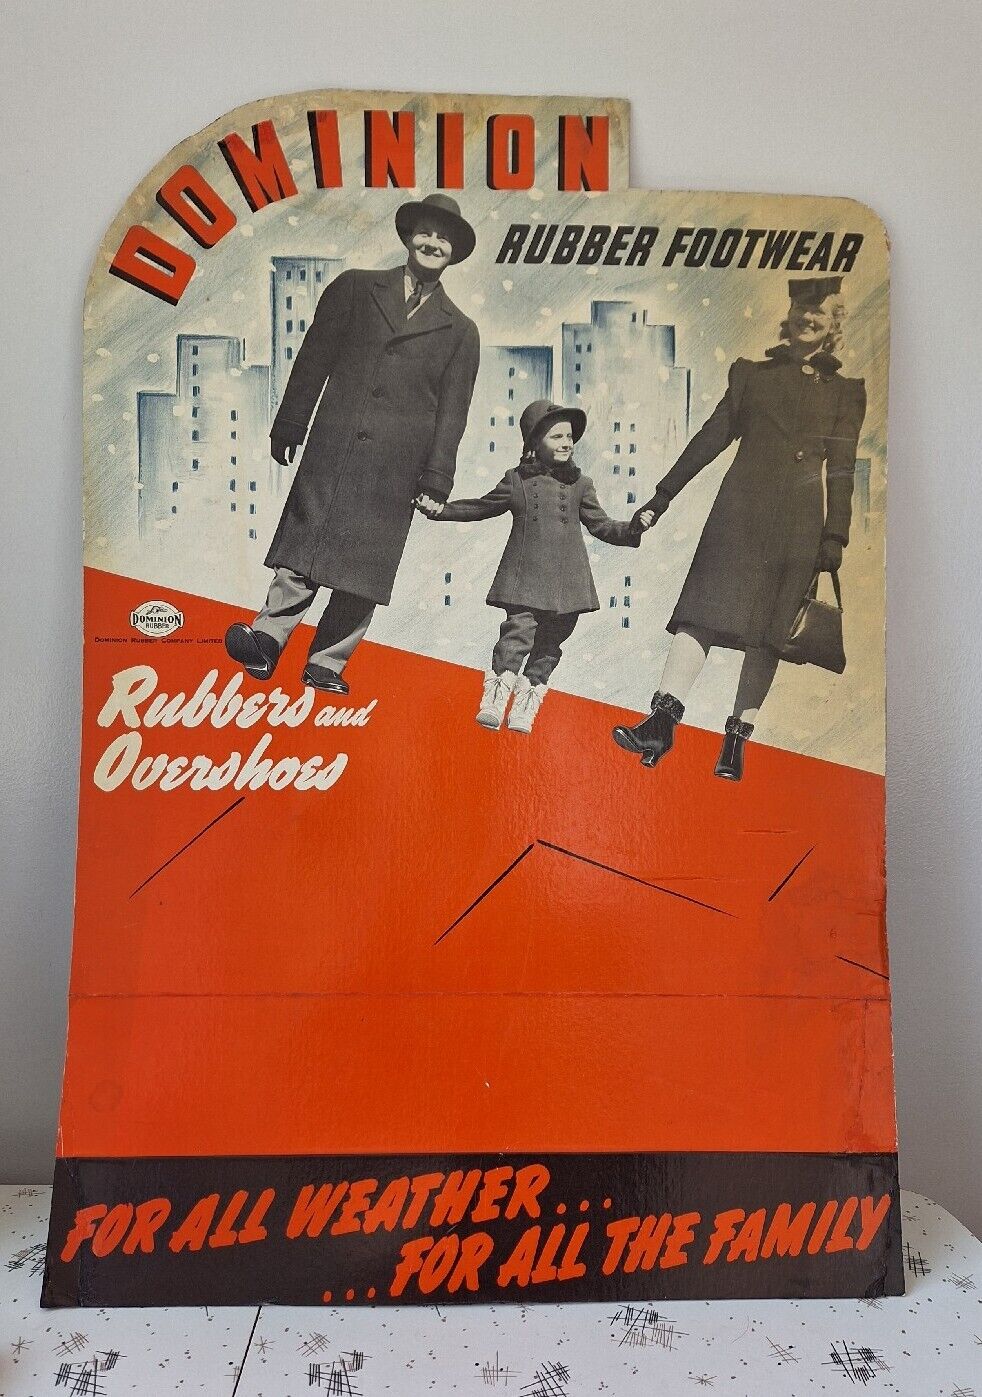 Dominion Rubber Footwear Advertising Standee 32½x22½